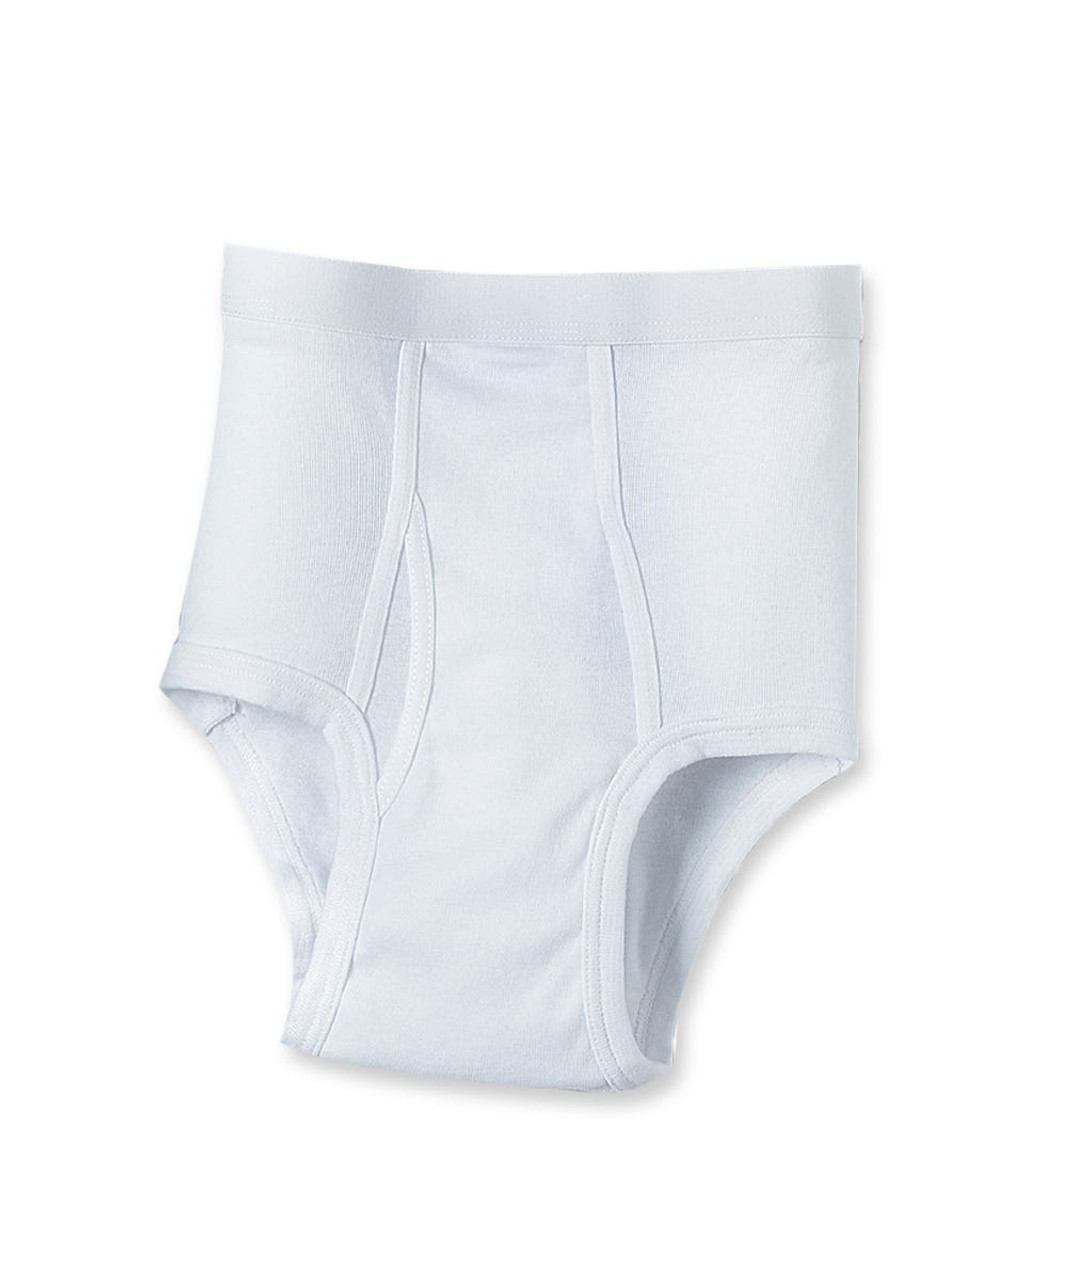 Silverts SV50250 Mens Conventional Cotton Briefs White, Size=S, SV50250-SV39-S